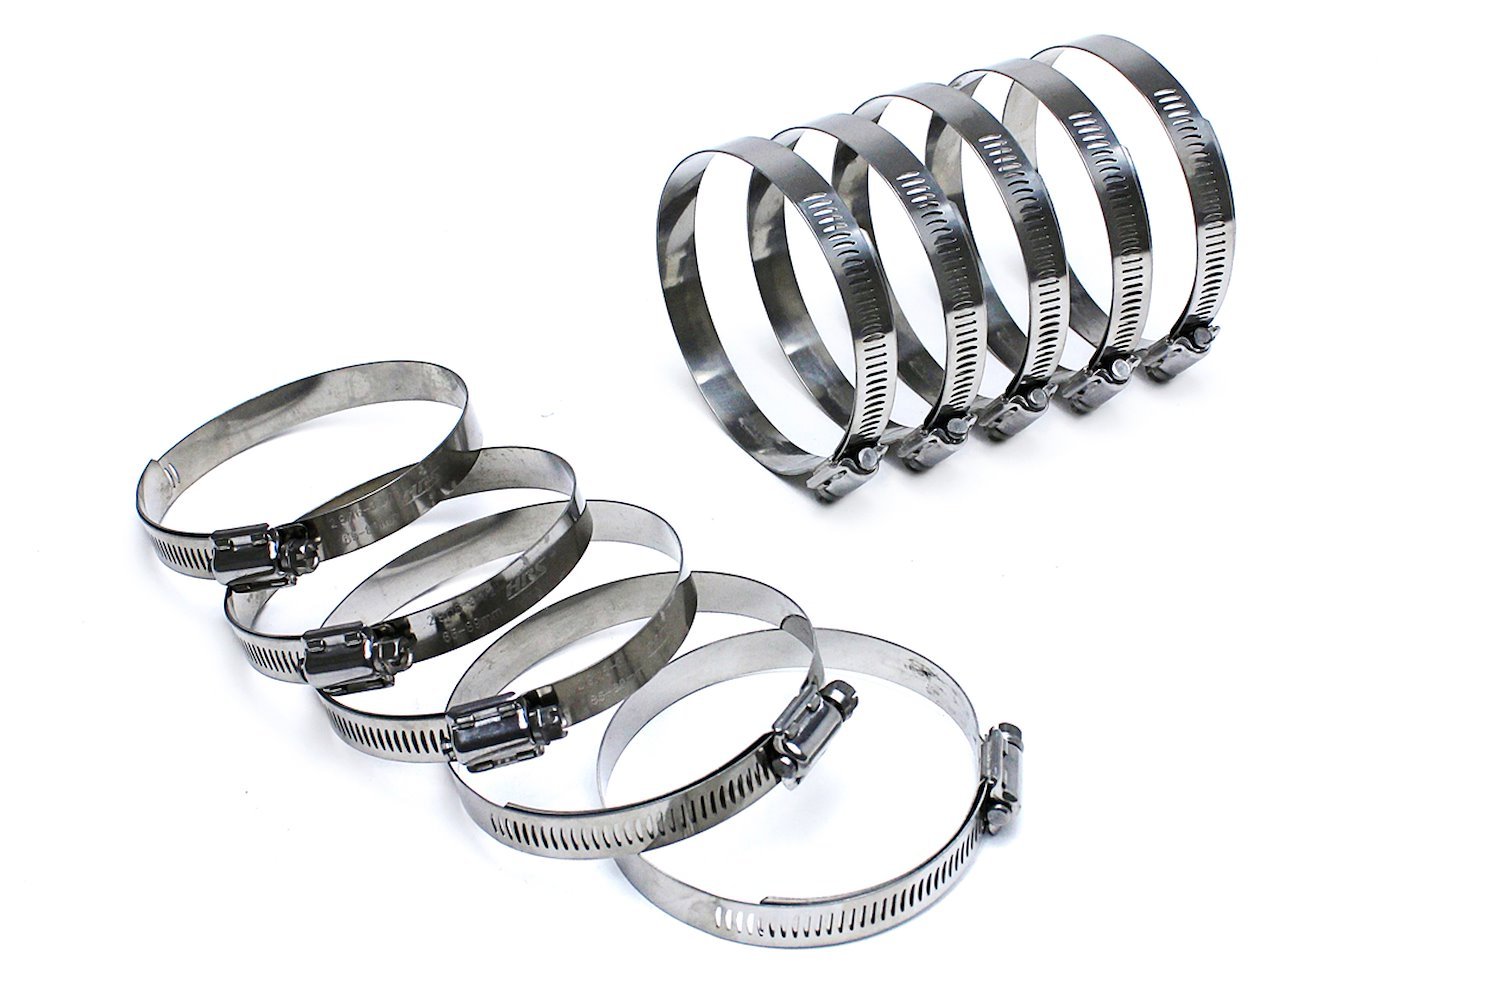 SSWC-117-140x10 Stainless Steel Worm Gear Hose Clamp, Effective Range: 4-5/8 in.- 5-1/2 in., 10Pc